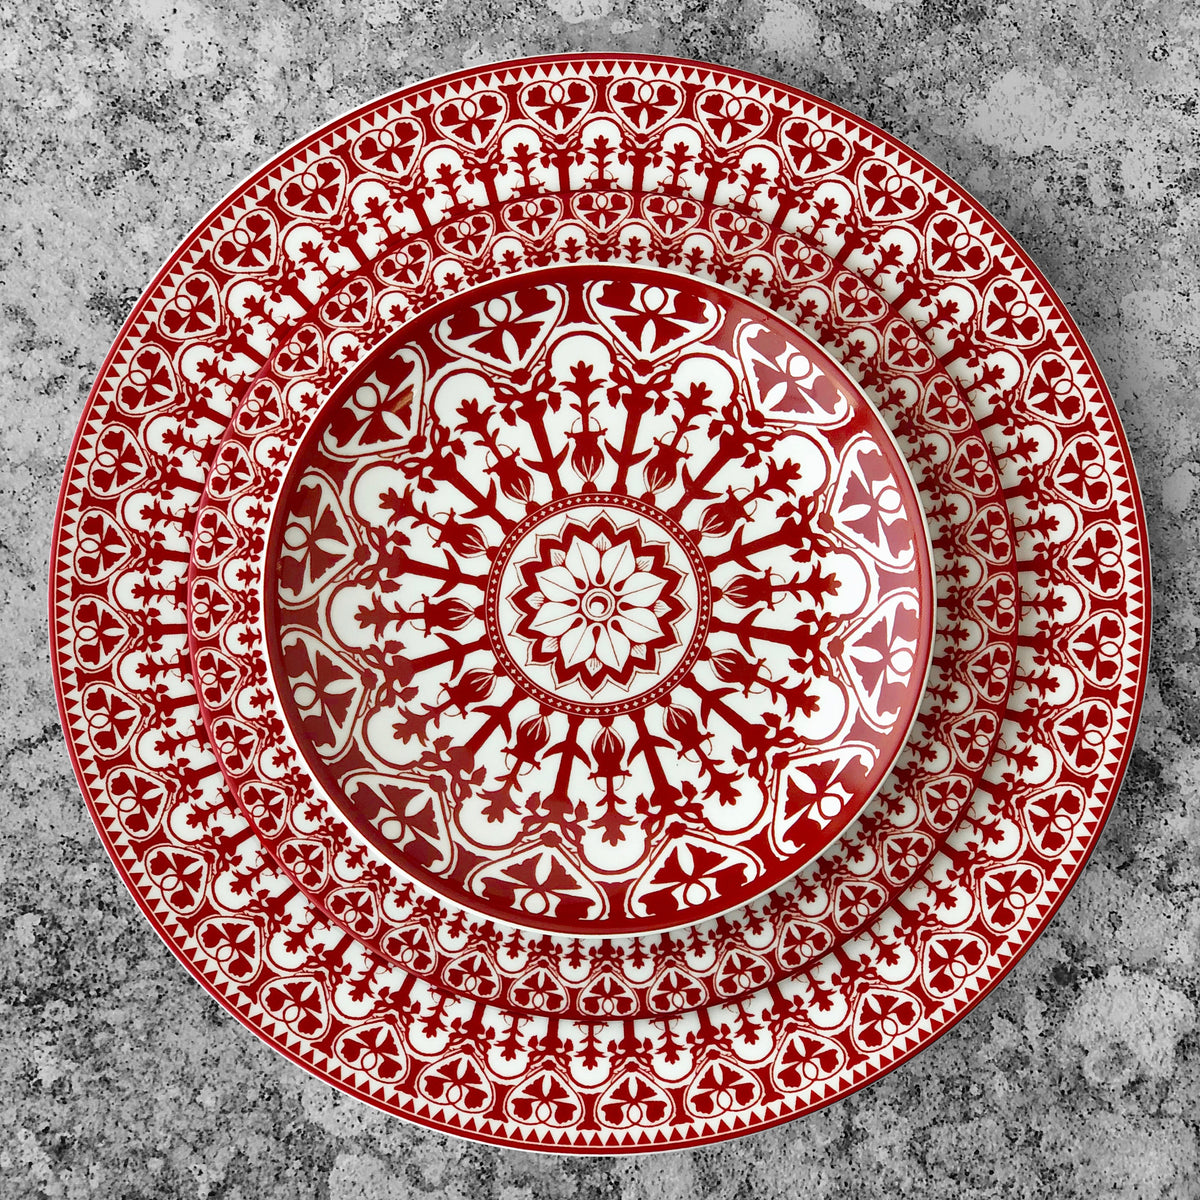 A Casablanca Crimson Salad Plate from Caskata Artisanal Home, with an ornate pattern, made of premium porcelain dinnerware that is dishwasher and microwave safe.